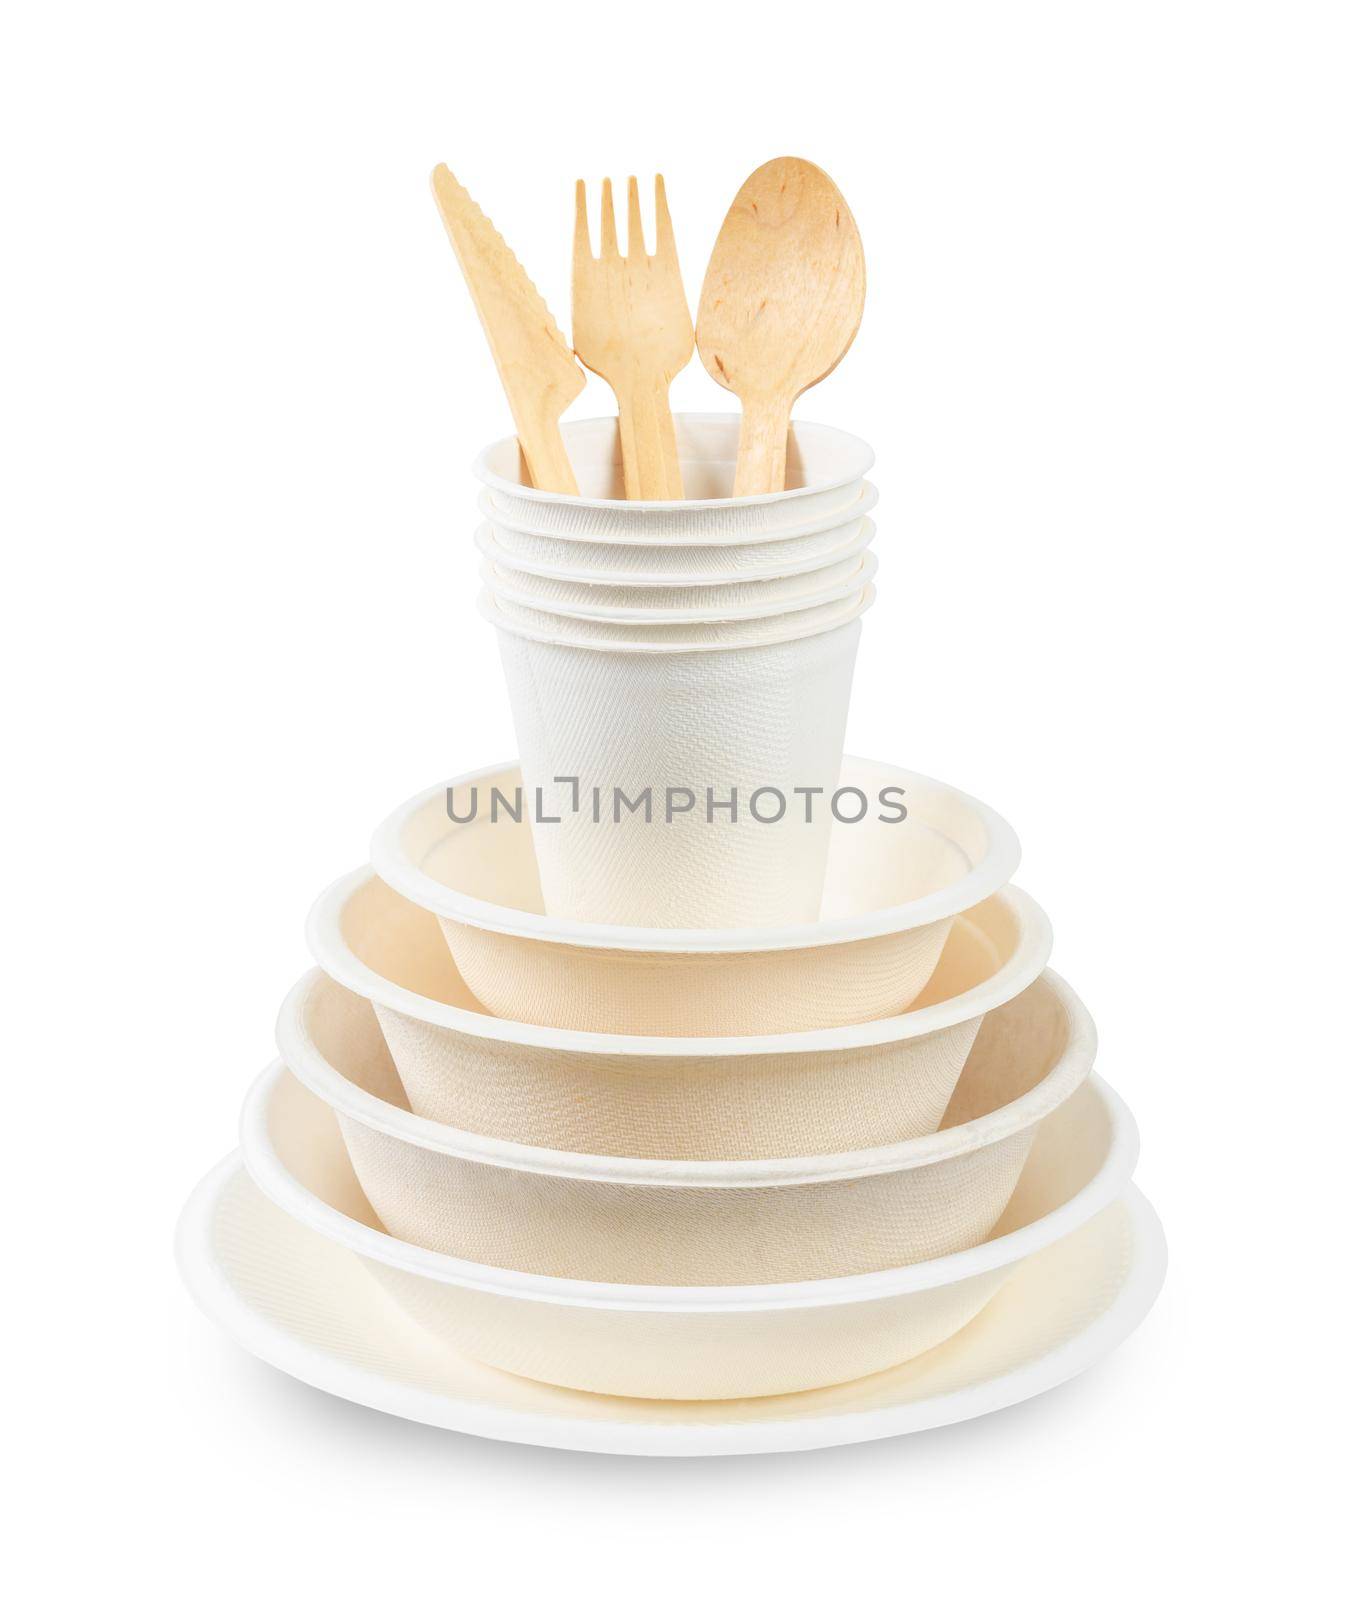 Set of unbleached plant fiber food box and paper cup isolated on white background, Save clipping path. Natural fiber eco food and drink packaging.